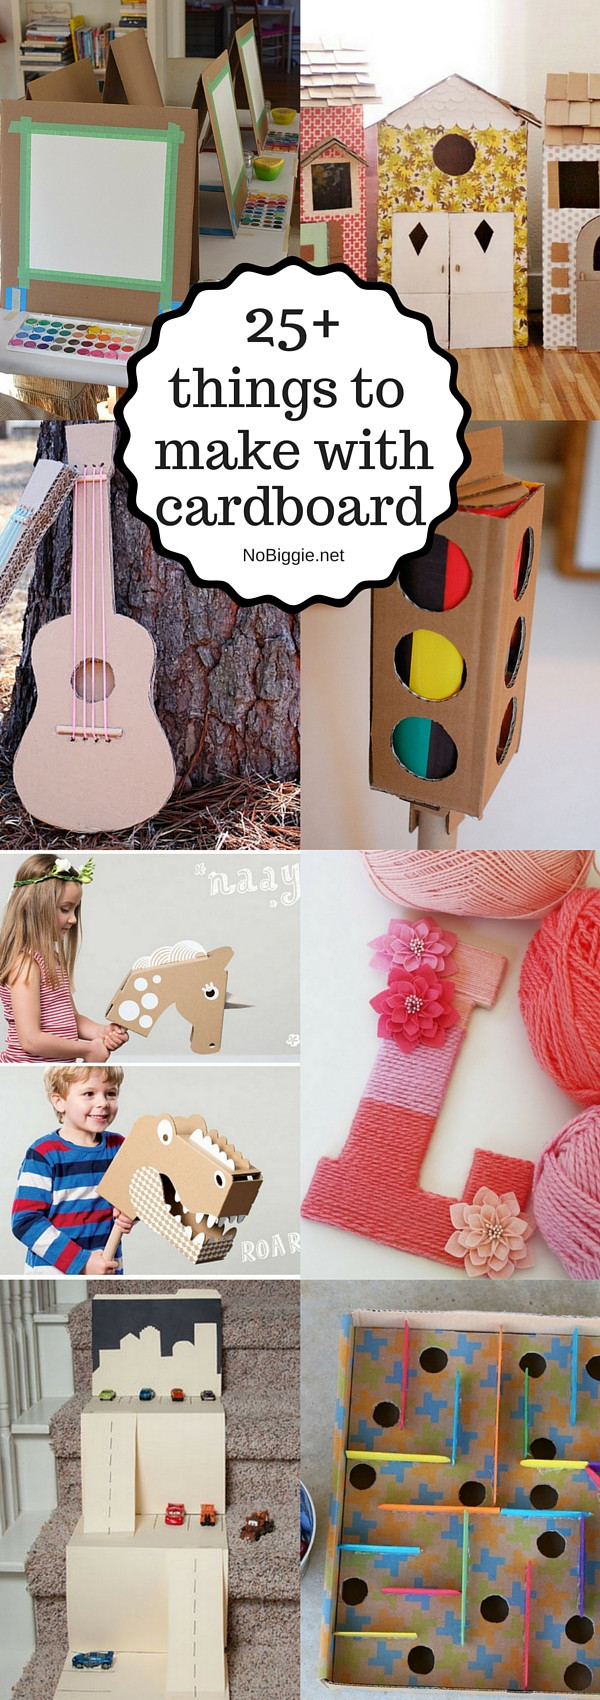 Fun Things For Kids To Make
 25 Things to Make with Cardboard